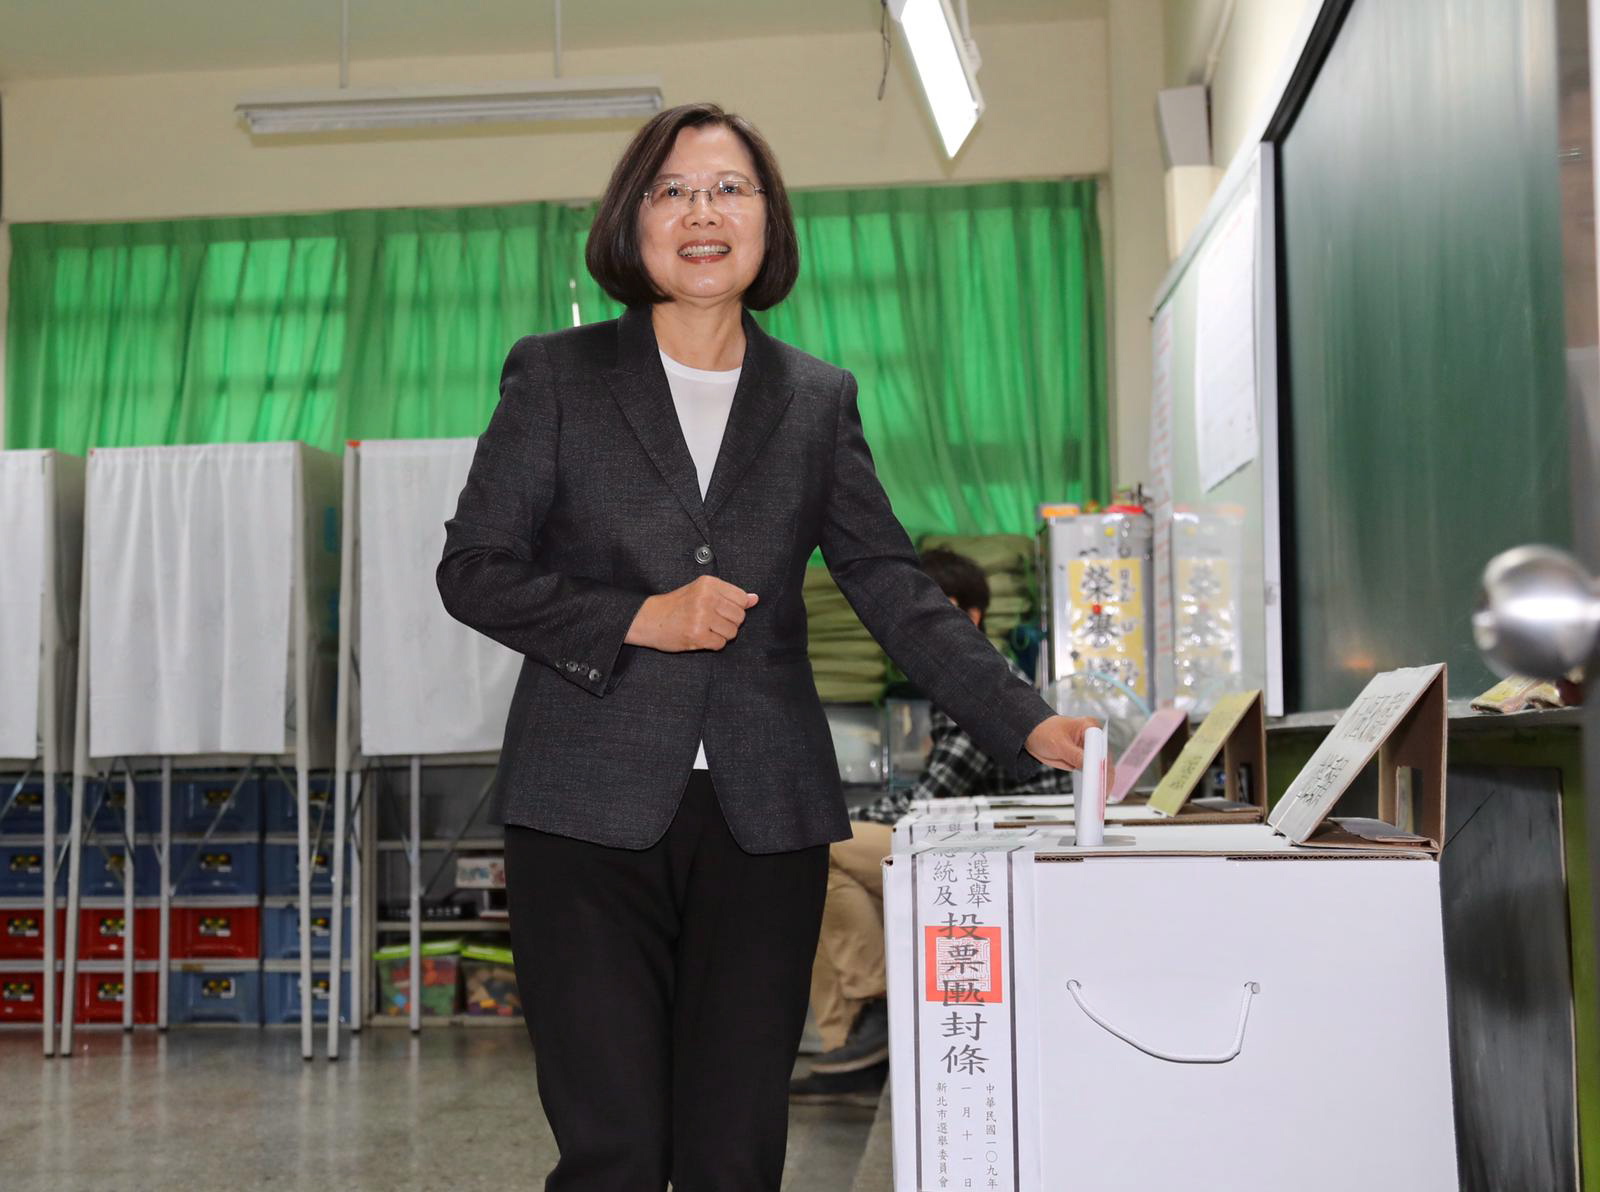 epa08118349 Taiwan President Tsai Ing-wen casts her ballot at a polling station in Taipei, Taiwan, 11 January 2020. Taiwan holds its presidential election on 11 January 2020 where President Tsai, from the separatist ruling Democratic Progressive Party, is seeking a second four-year term against Kaohsiung city Mayor Han Kuo-yu, from Taiwan's China-friendly opposition party Kuomintang (KMT).  EPA/ZHANG HAO-AN POOL / POOL